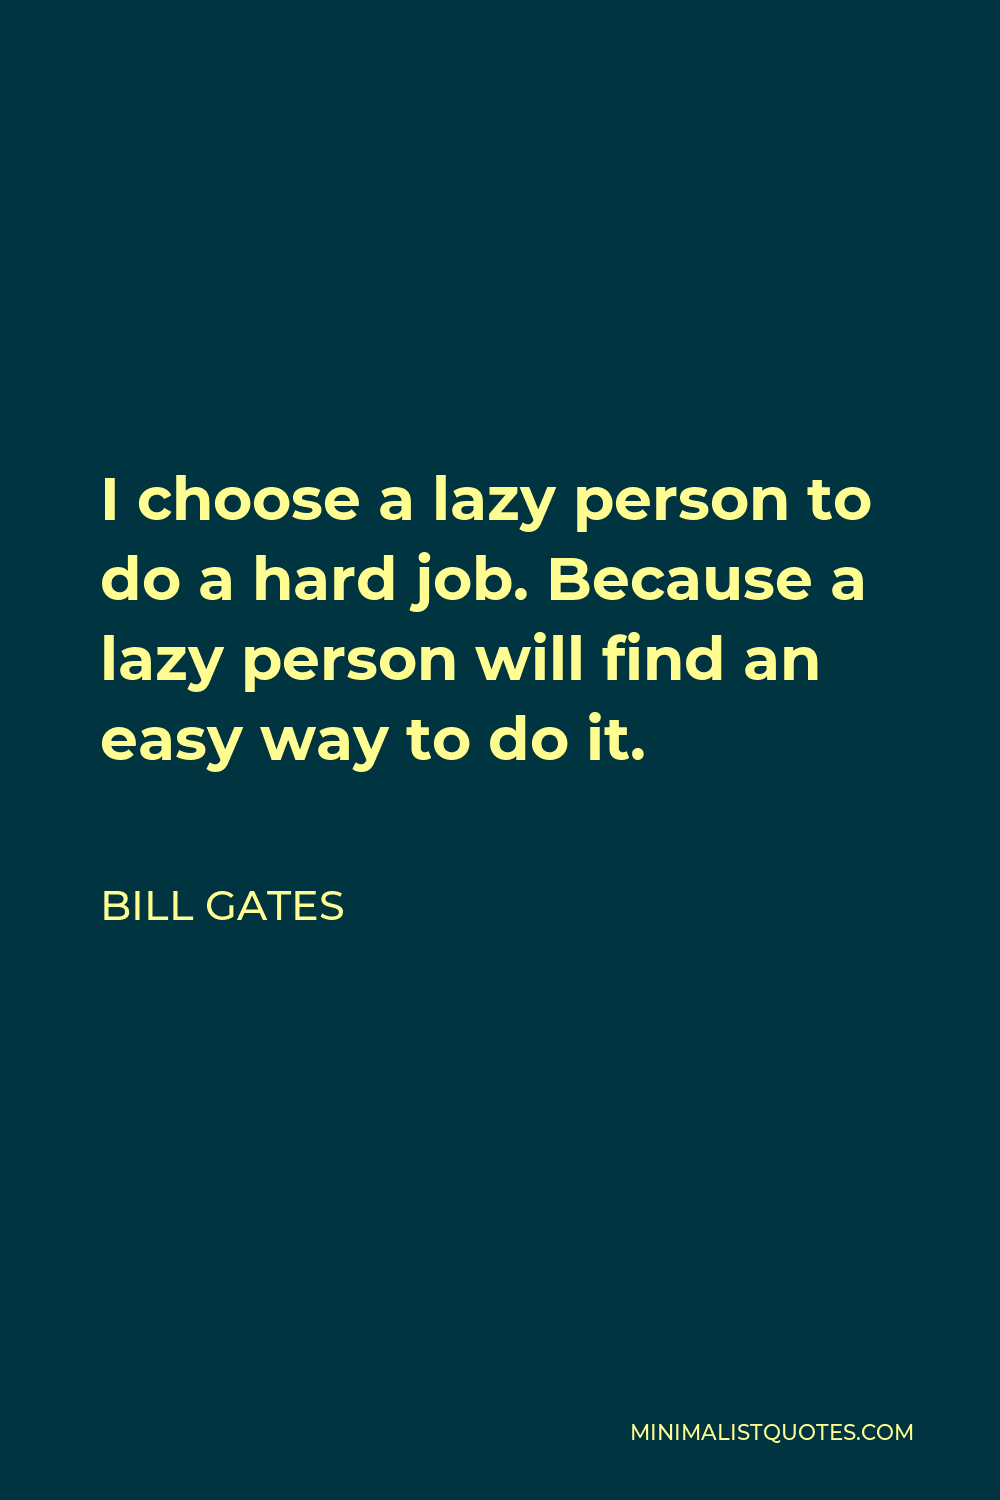 Bill Gates Quote - I choose a lazy person to do a hard job. Because a lazy person will find an easy way to do it.